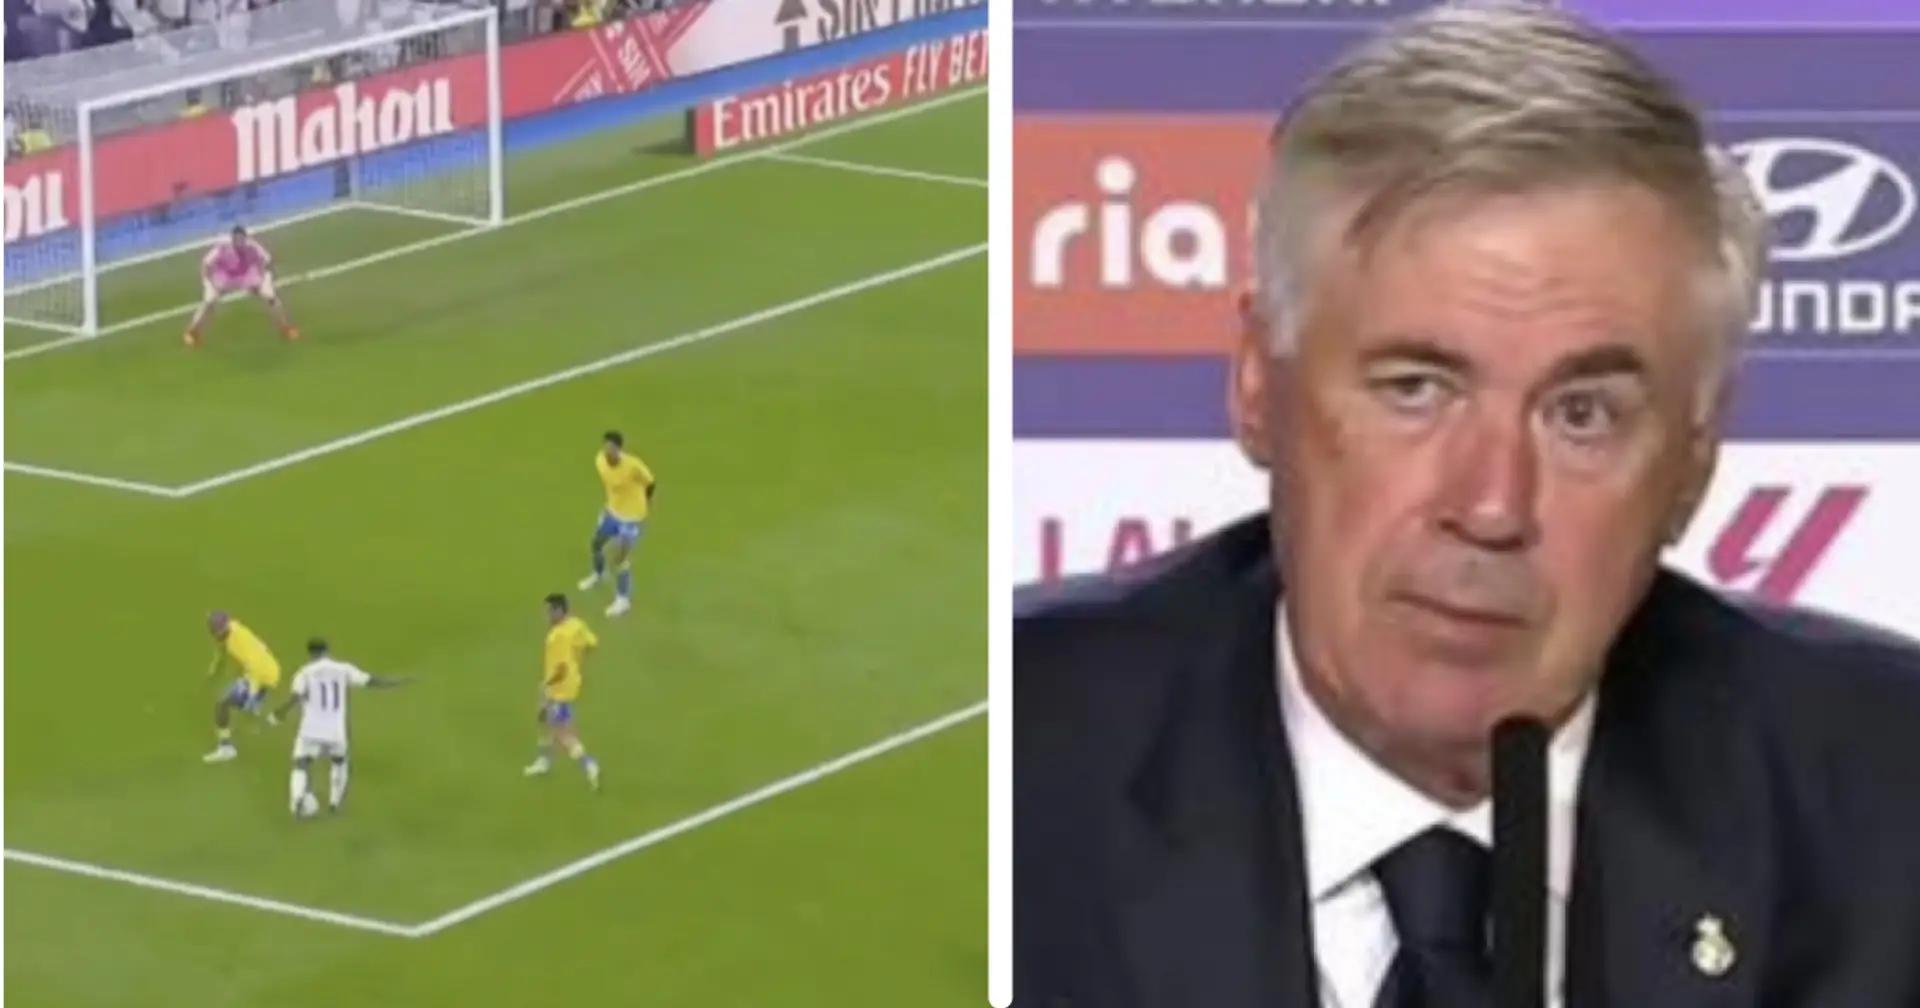 Ancelotti calls one episode in Las Palmas win 'fantastic' – not even one of the goals